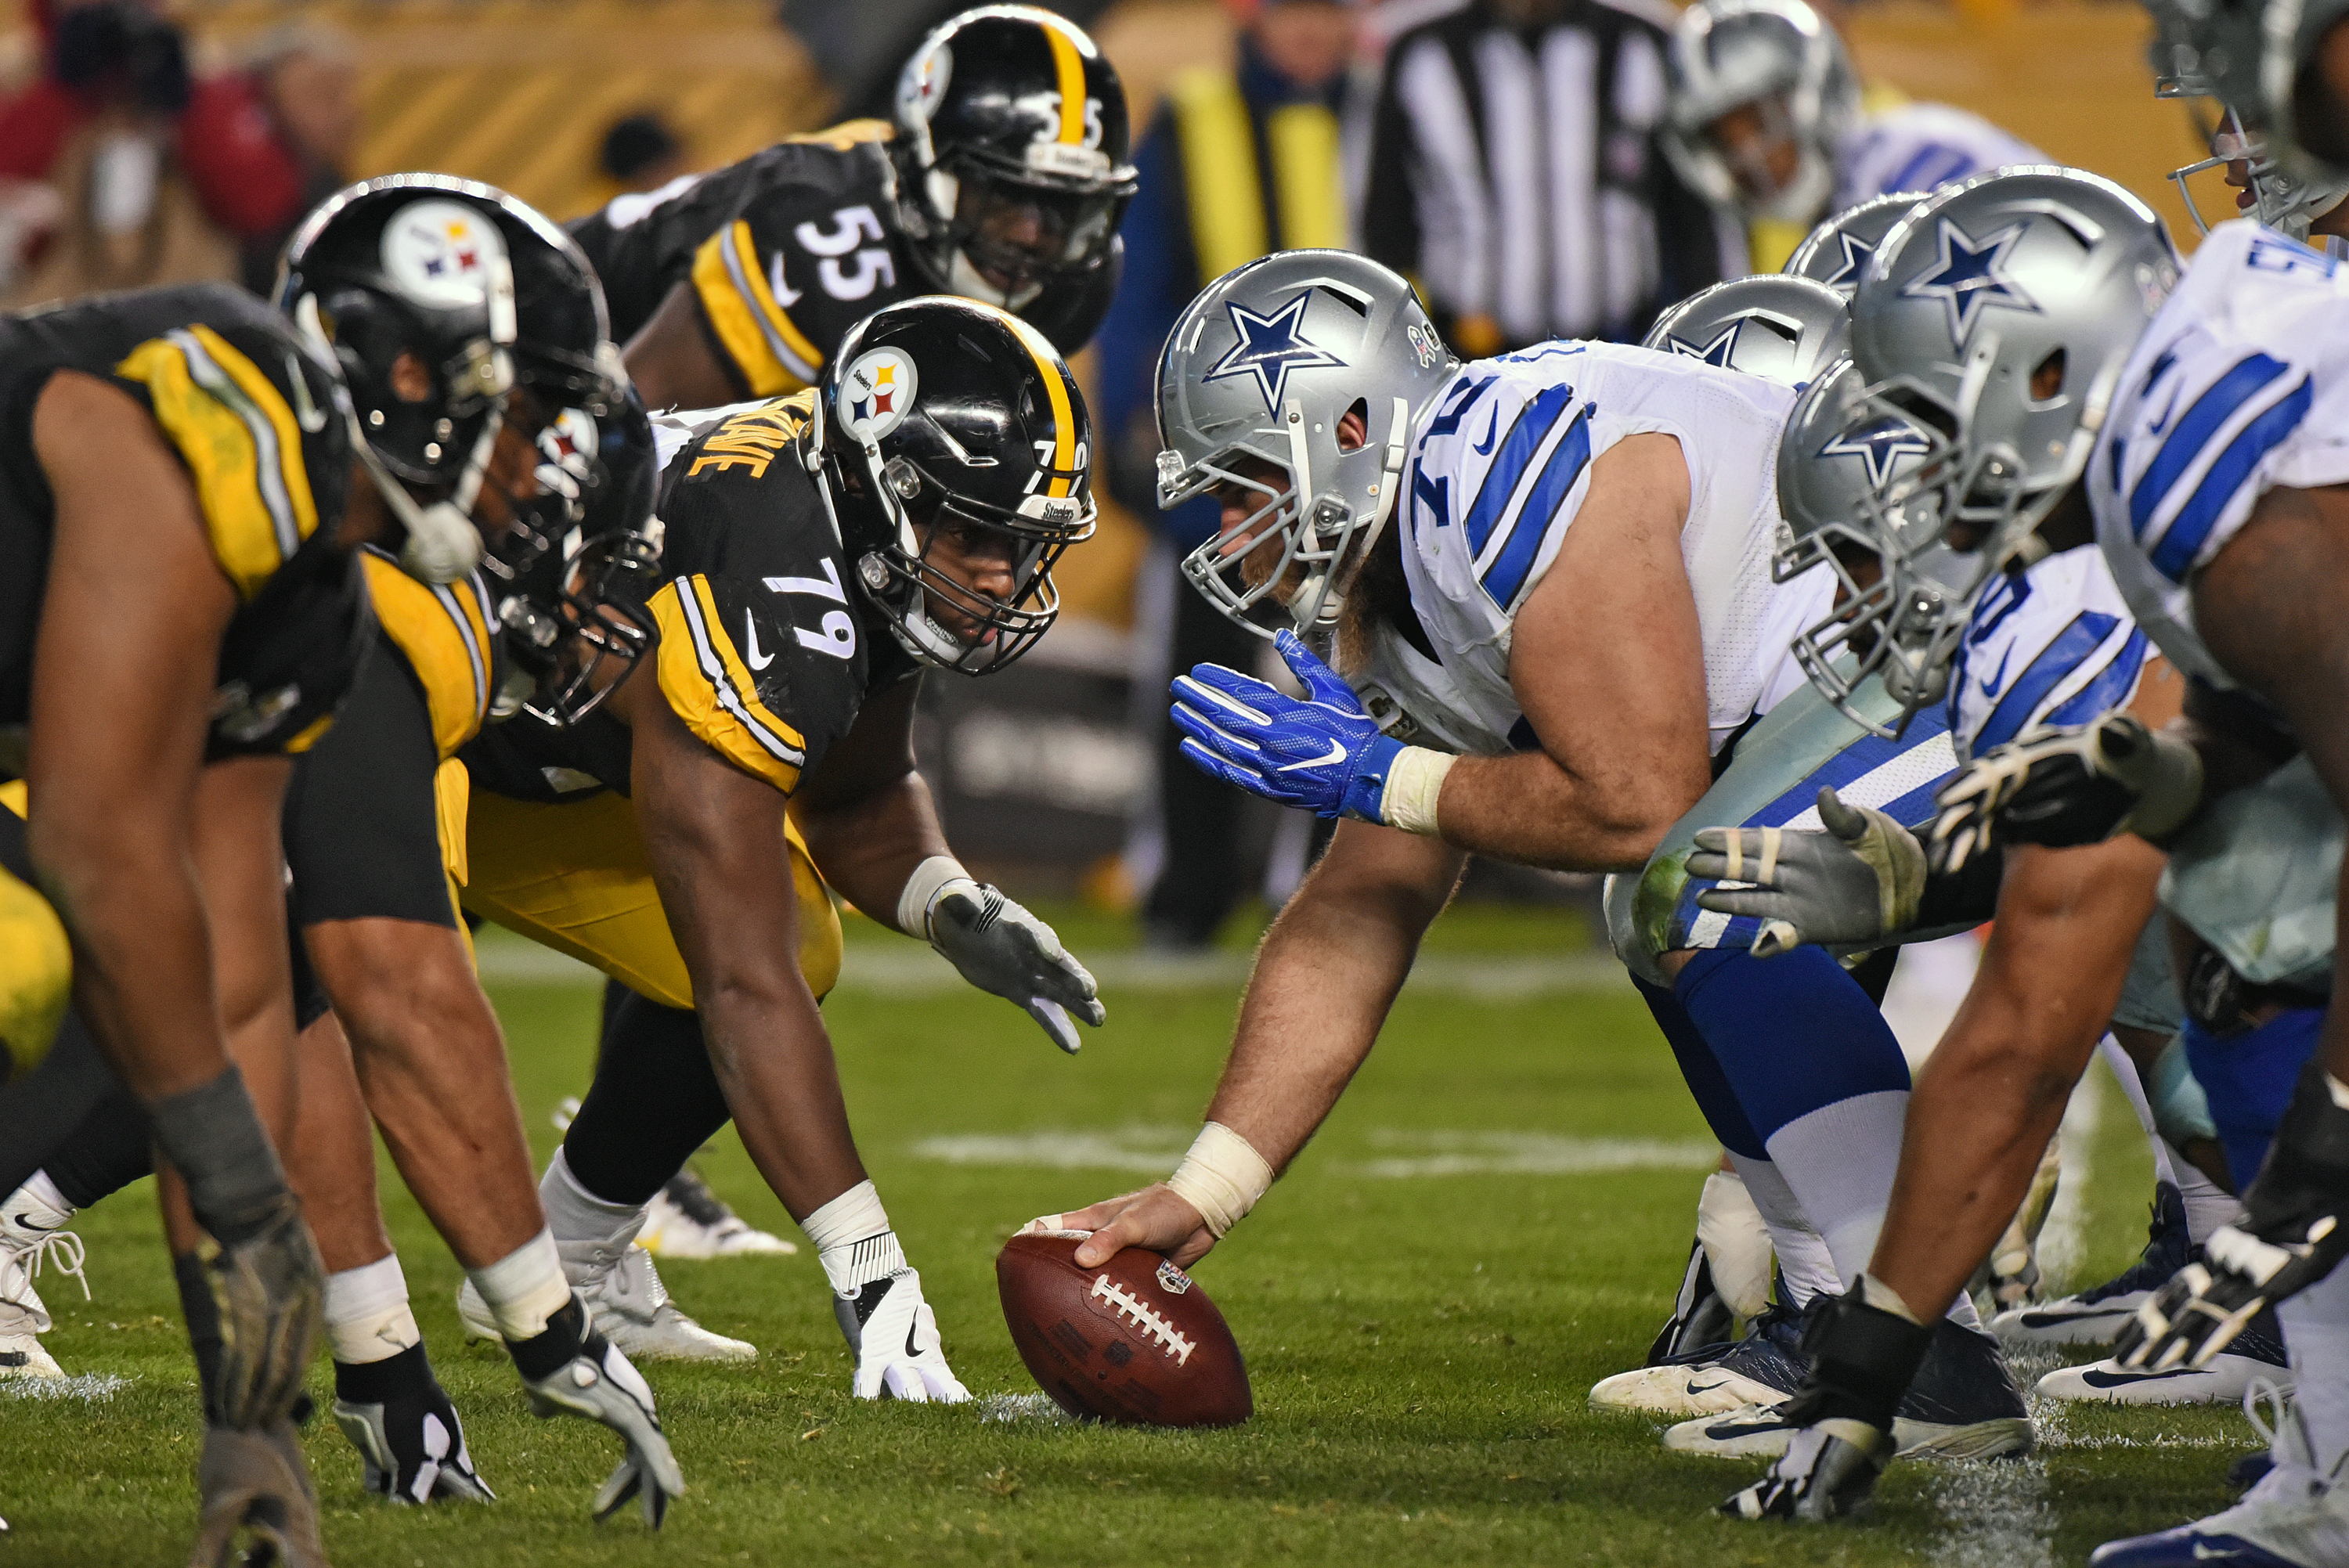 Cowboys Vs Steelers Announced For 2020 Pro Football Hall Of Fame Game Bleacher Report Latest News Videos And Highlights